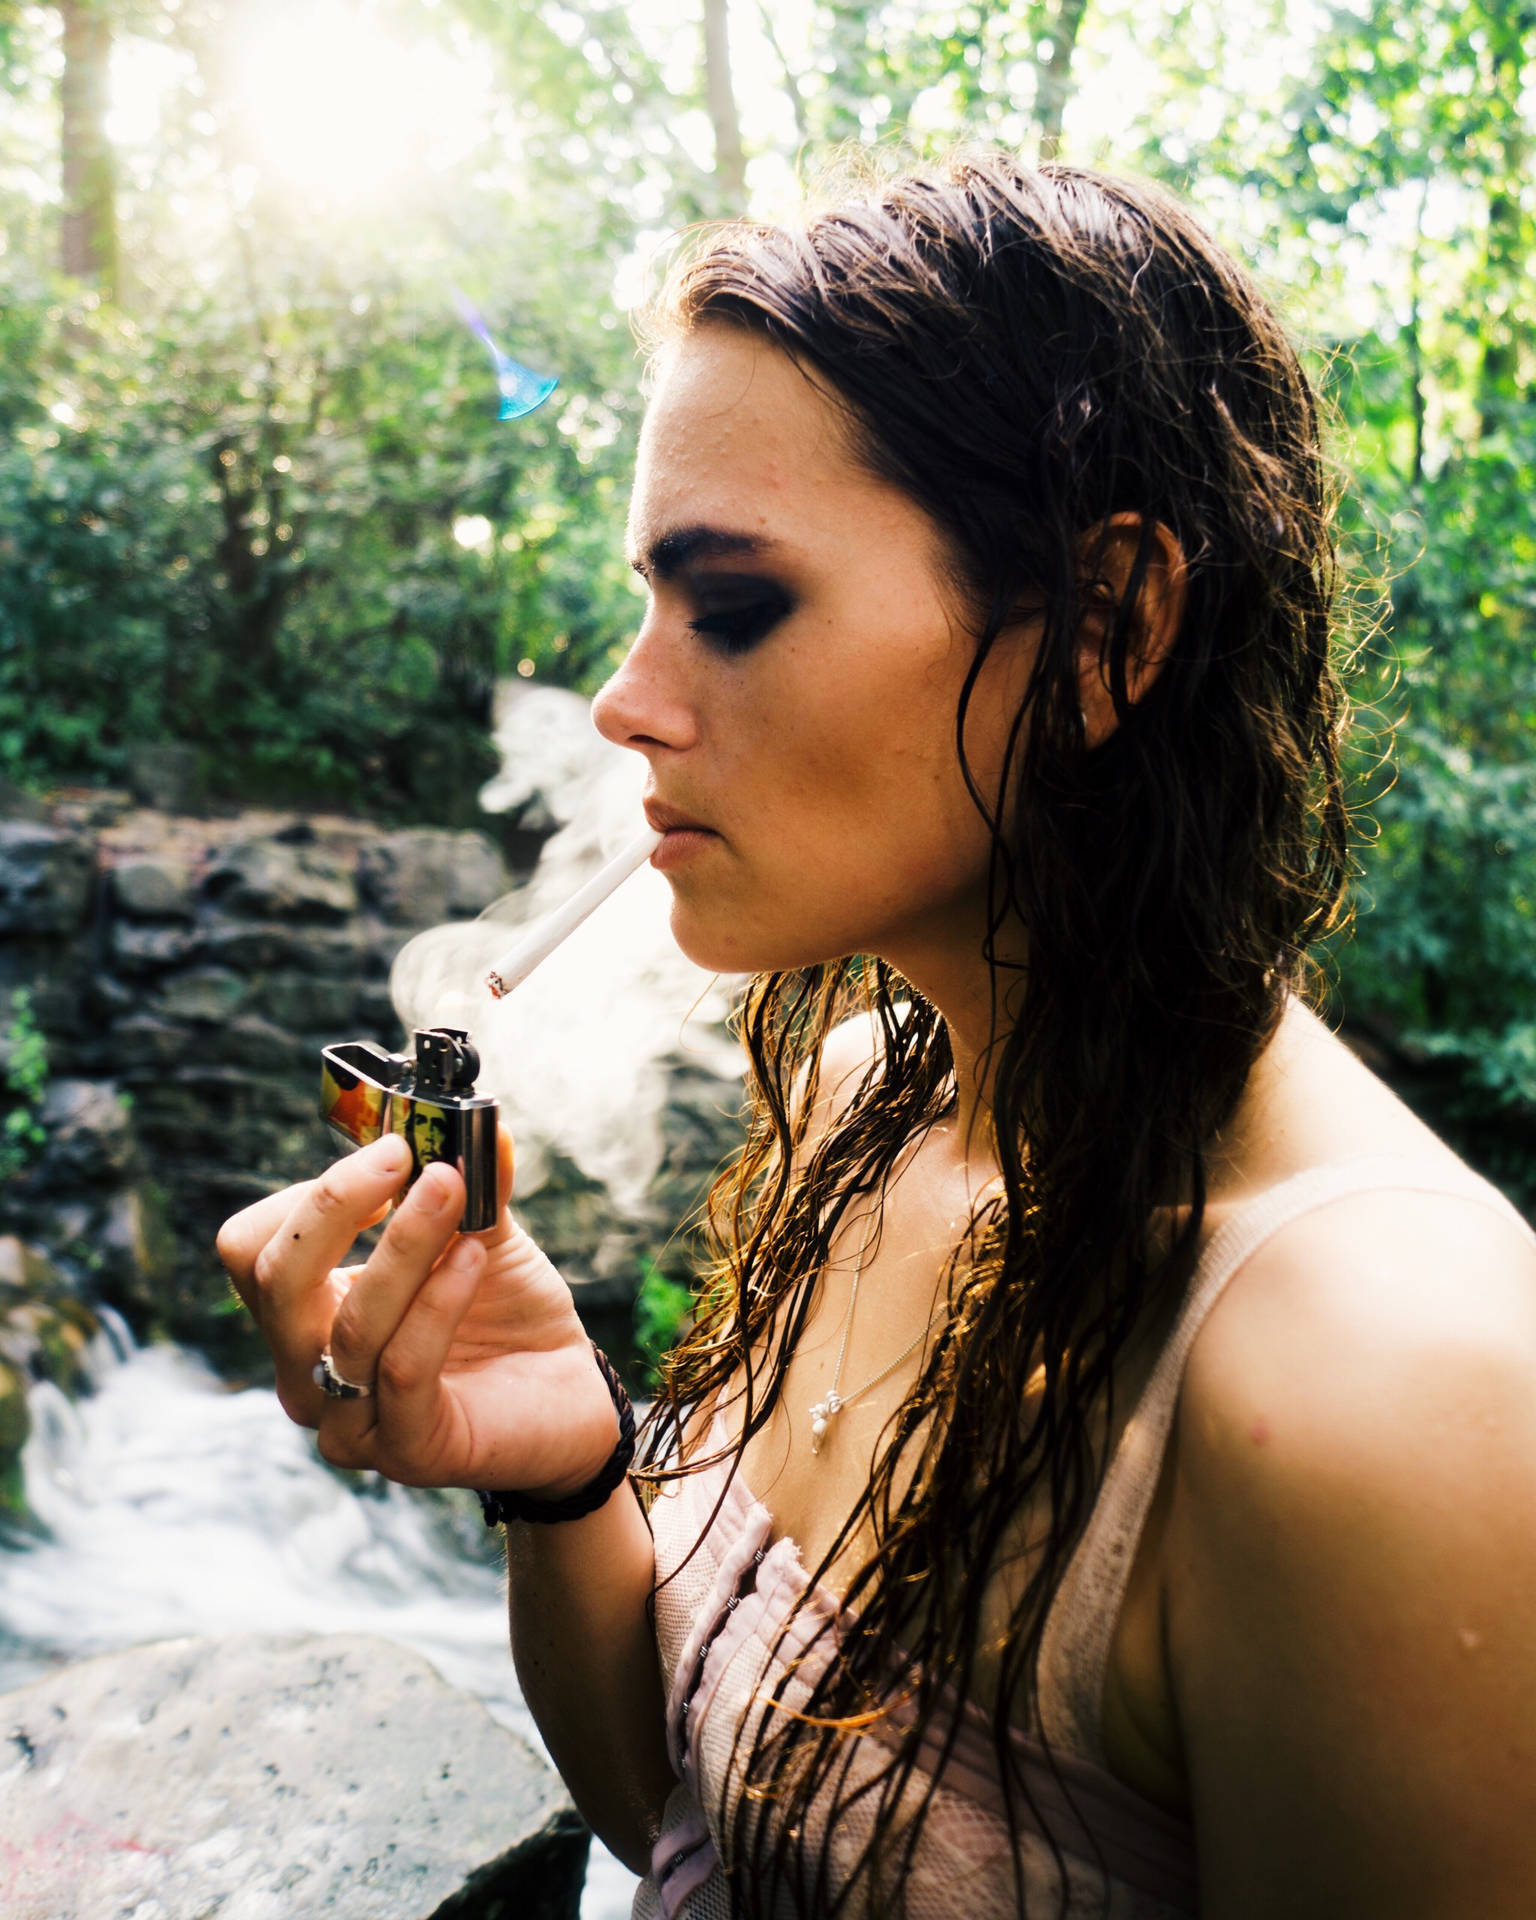 Woman Smoking Weed Joint